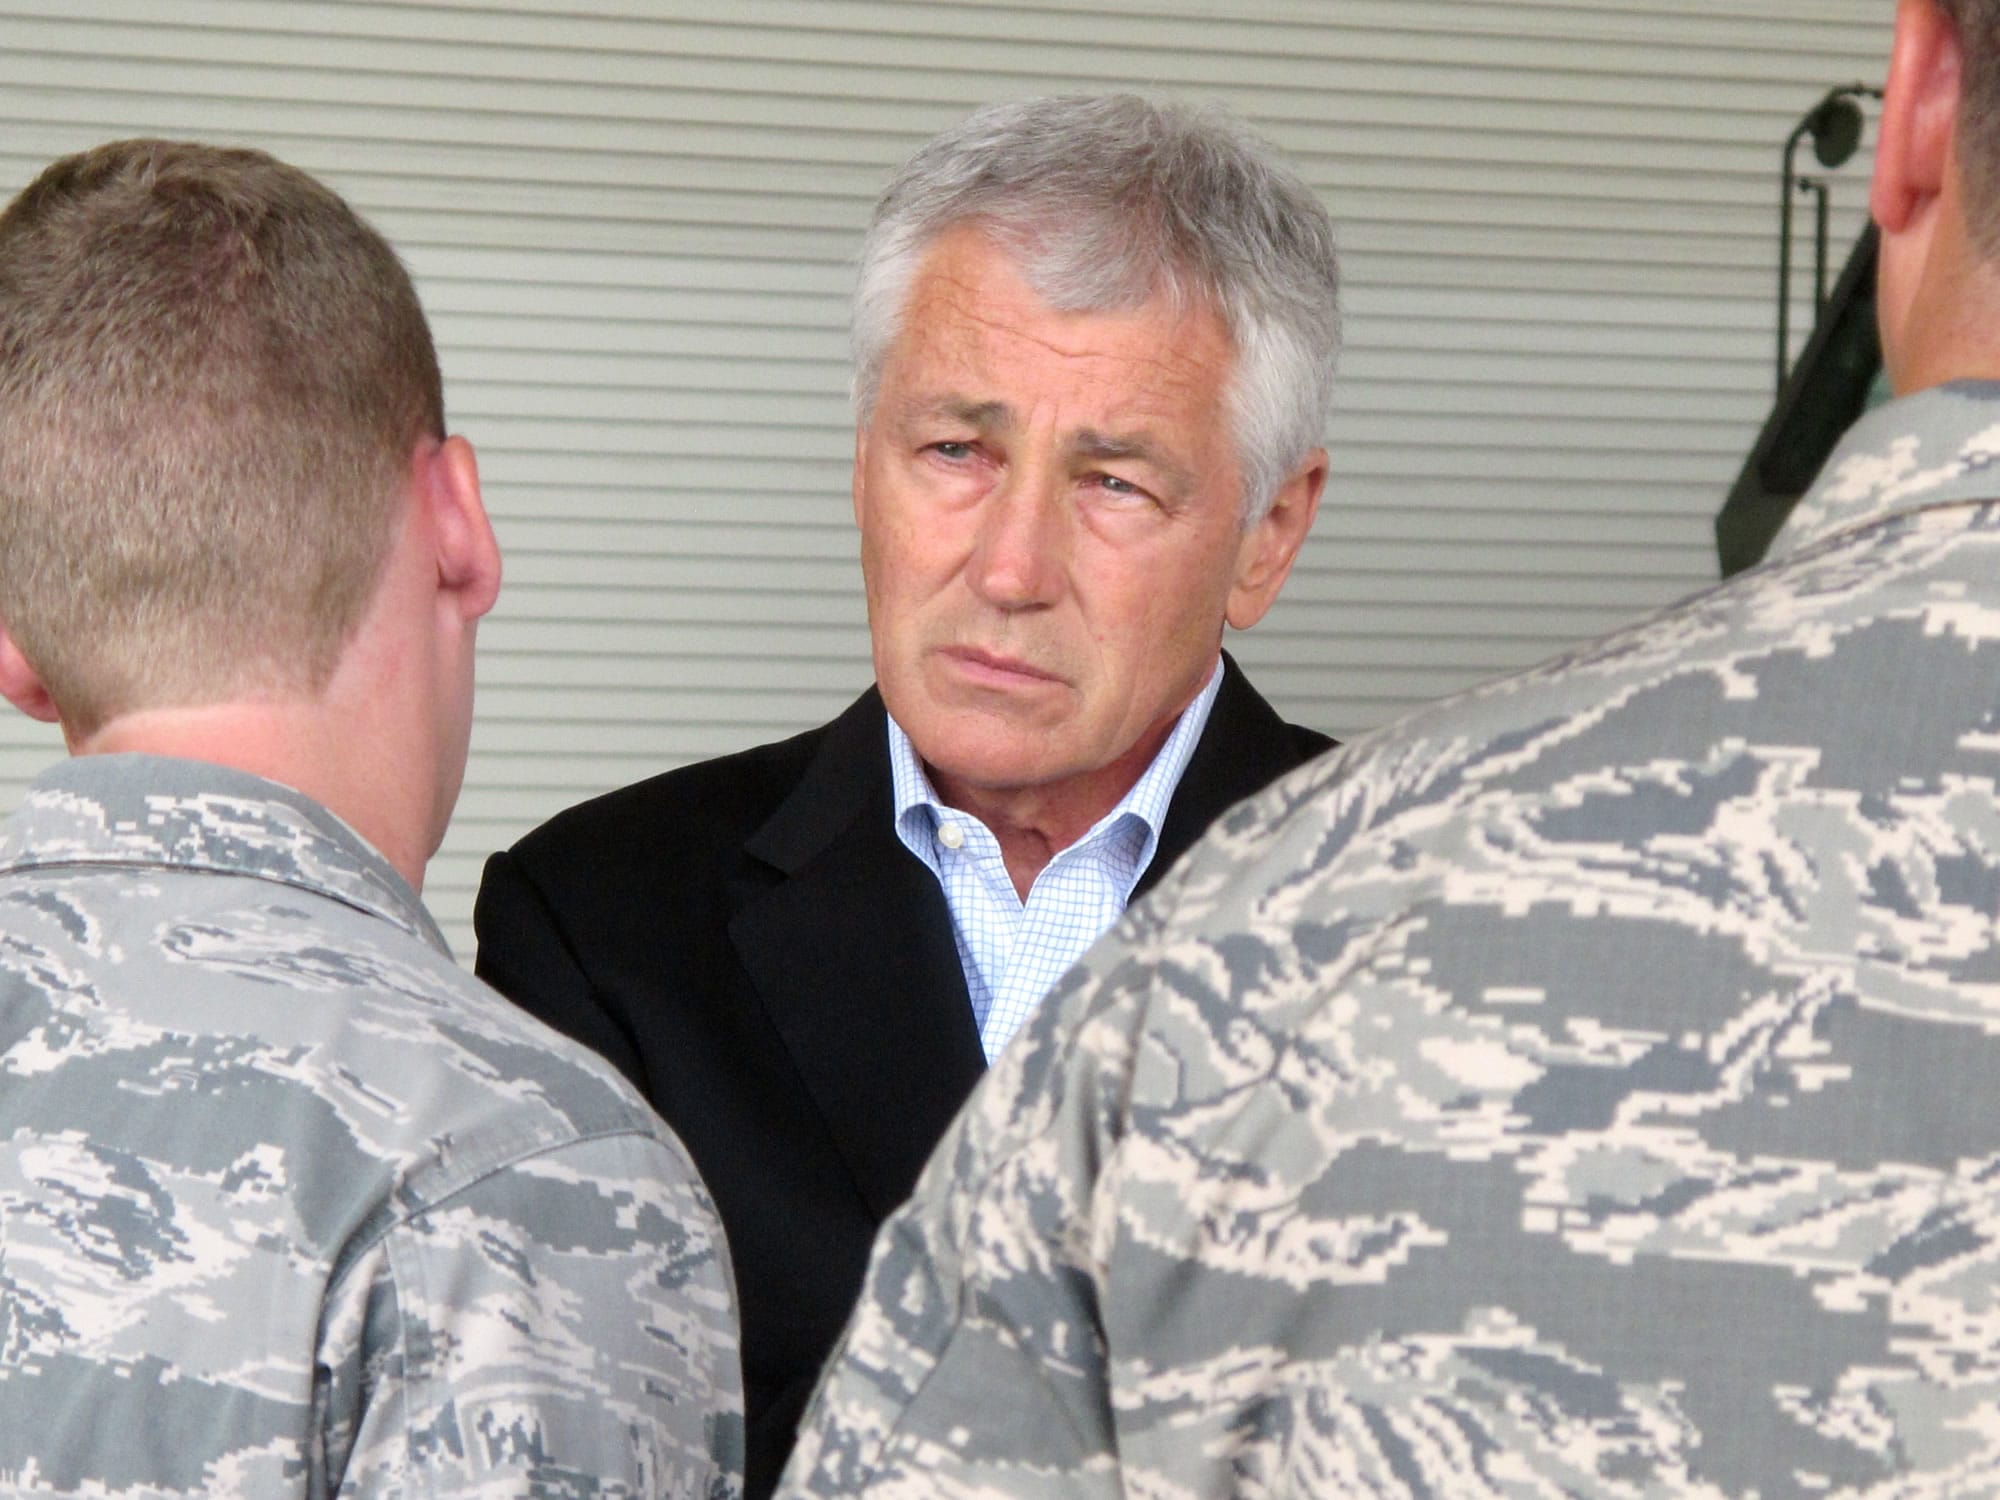 Defense Secretary Chuck Hagel talks July 17 with Air Force personnel at Joint Base Charleston near Charleston, S.C., on the last day of a three-day trip to visit bases in the Carolinas and Florida. When Hagel told civilian Department of Defense workers on the base that job furloughs, which have forced a 20 percent pay cut on most of the militay's civilian workforce, will likely continue next year, and that it make it even worse, the audience softly gasped in surprise and gave a few depressed low whistles.